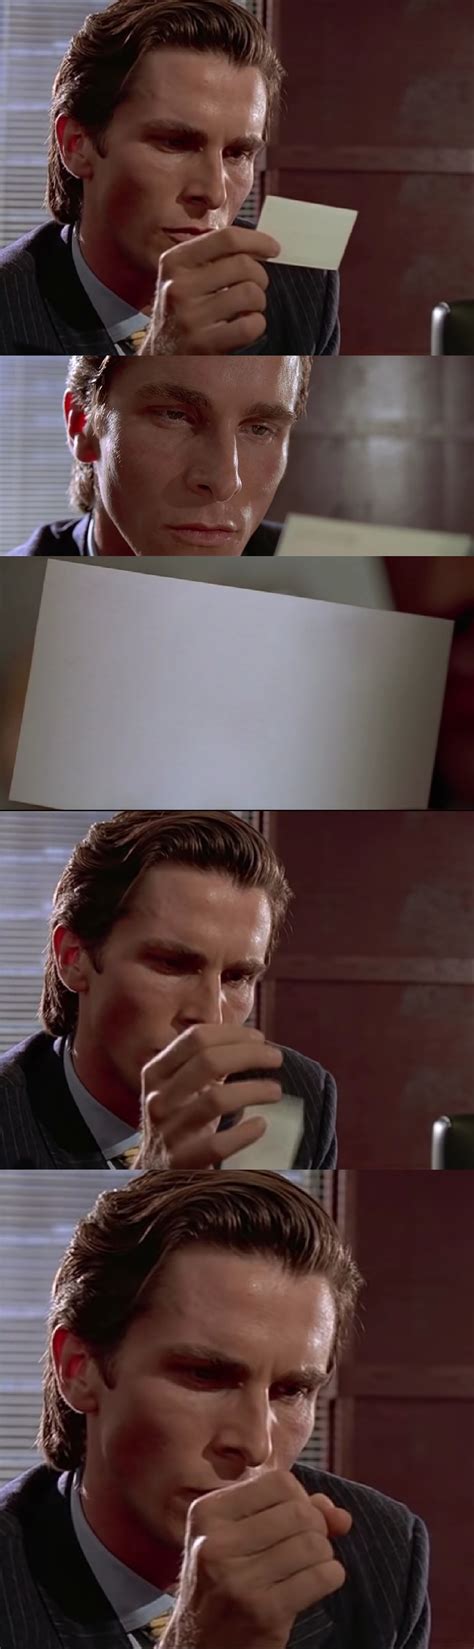 American Psycho Business Card Meme American Psycho Business Card